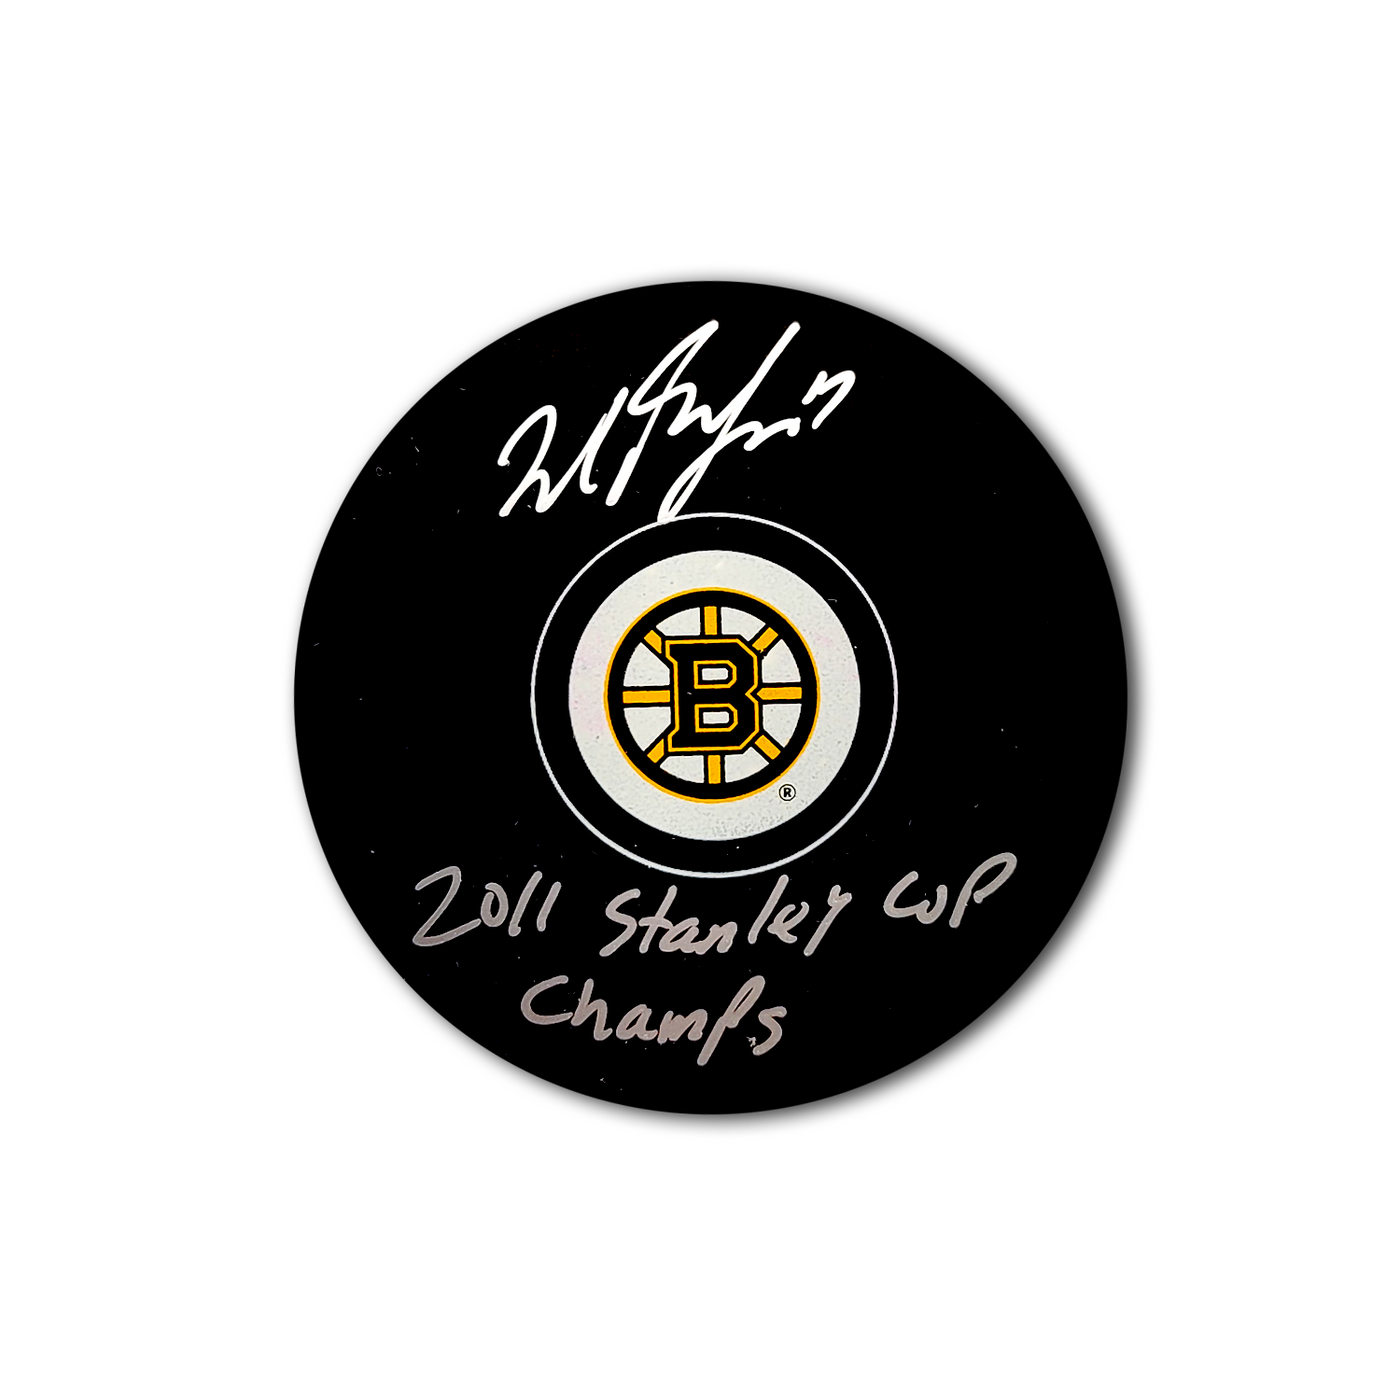 Milan Lucic Boston Bruins Autographed Hockey Puck Inscribed 2011 Stanley Cup Champs